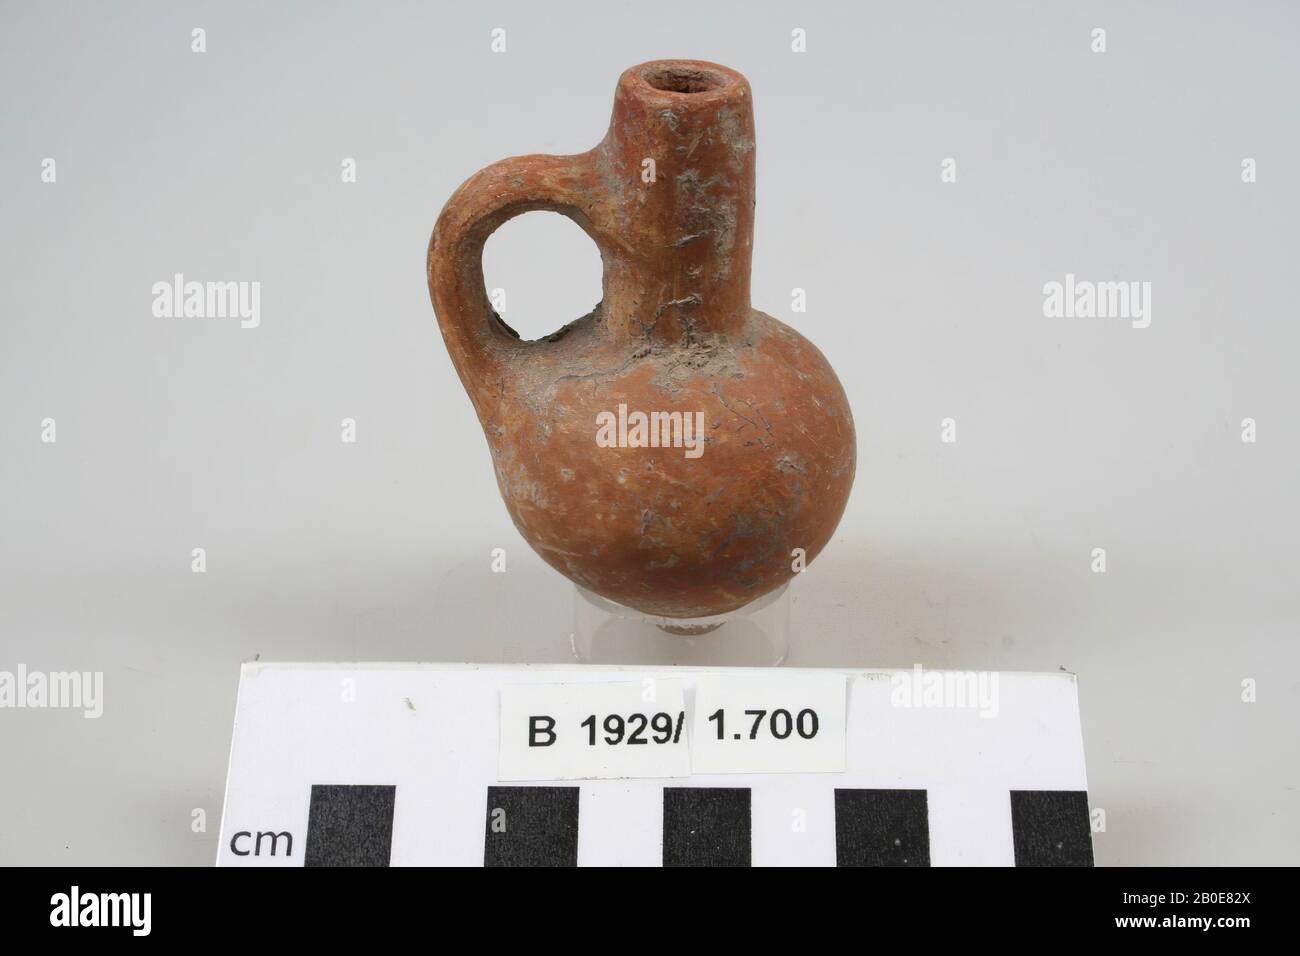 an earthenware jug with straight neck, one earpiece and ball body. The object is red slotted, crockery, earthenware, H 8 cm, D 4.9 cm, W 5.3 cm, Iron Age II 925-539 BC, Palestine Stock Photo